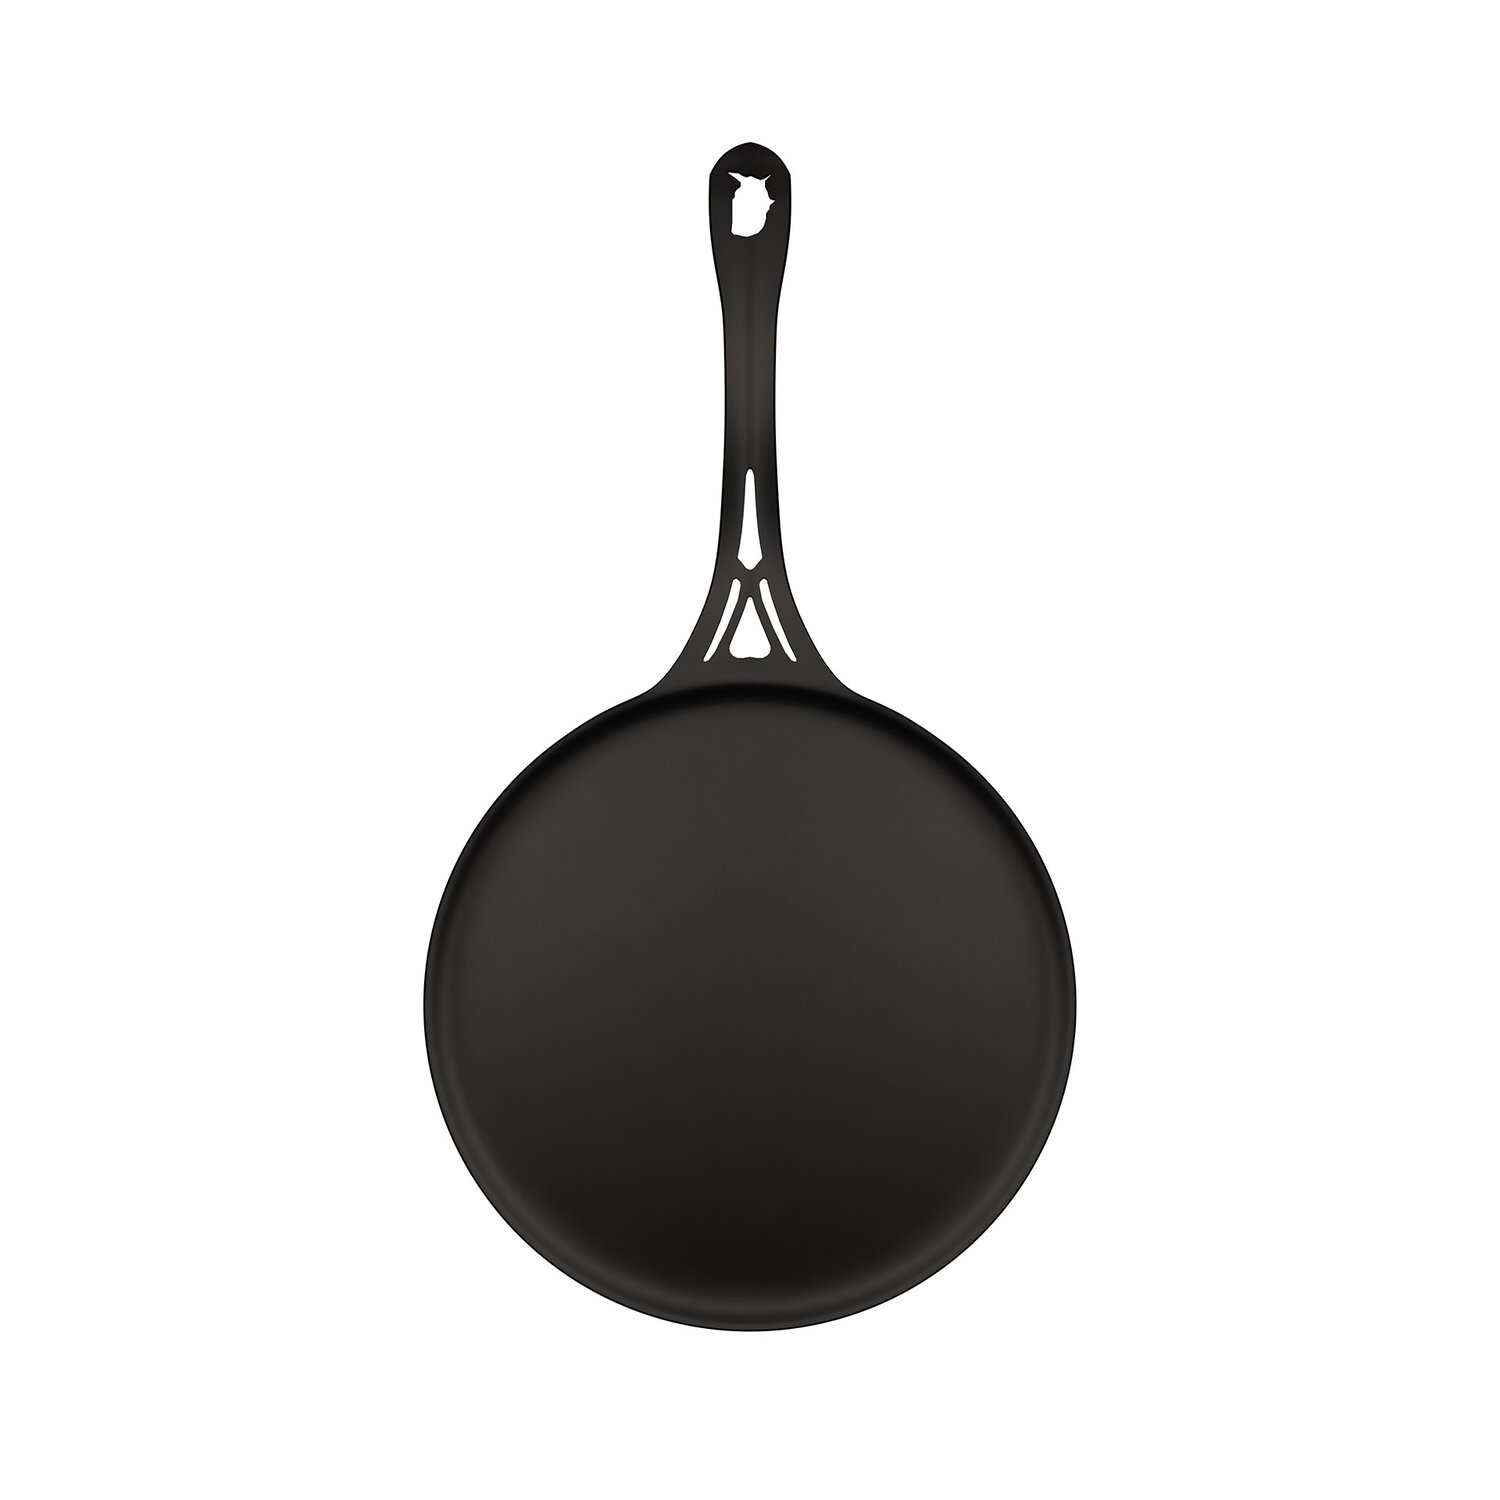 Where to buy that cast iron skillet with sections? - GardenFork - Eclectic  DIY